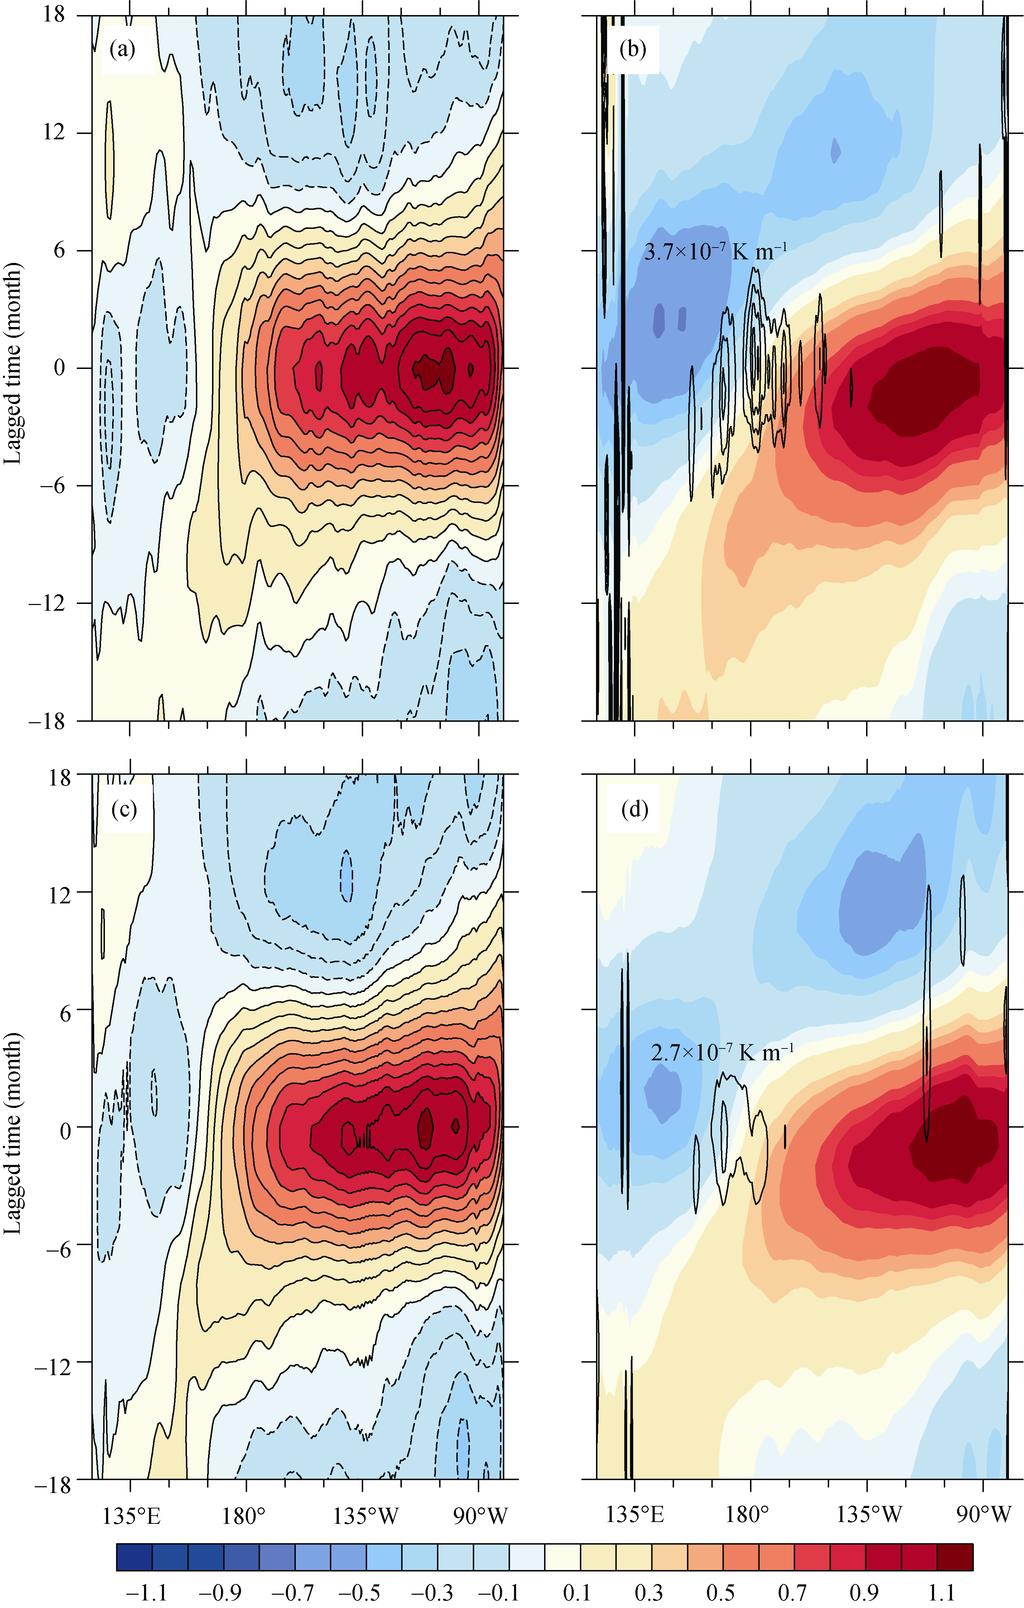 NO. 1 WANG AND ZHOU: ENSO SIGNALS IN AIPO 57 than normal at the same time. In general, the AIPO SSTAs show a nearly identical pattern to the observation.